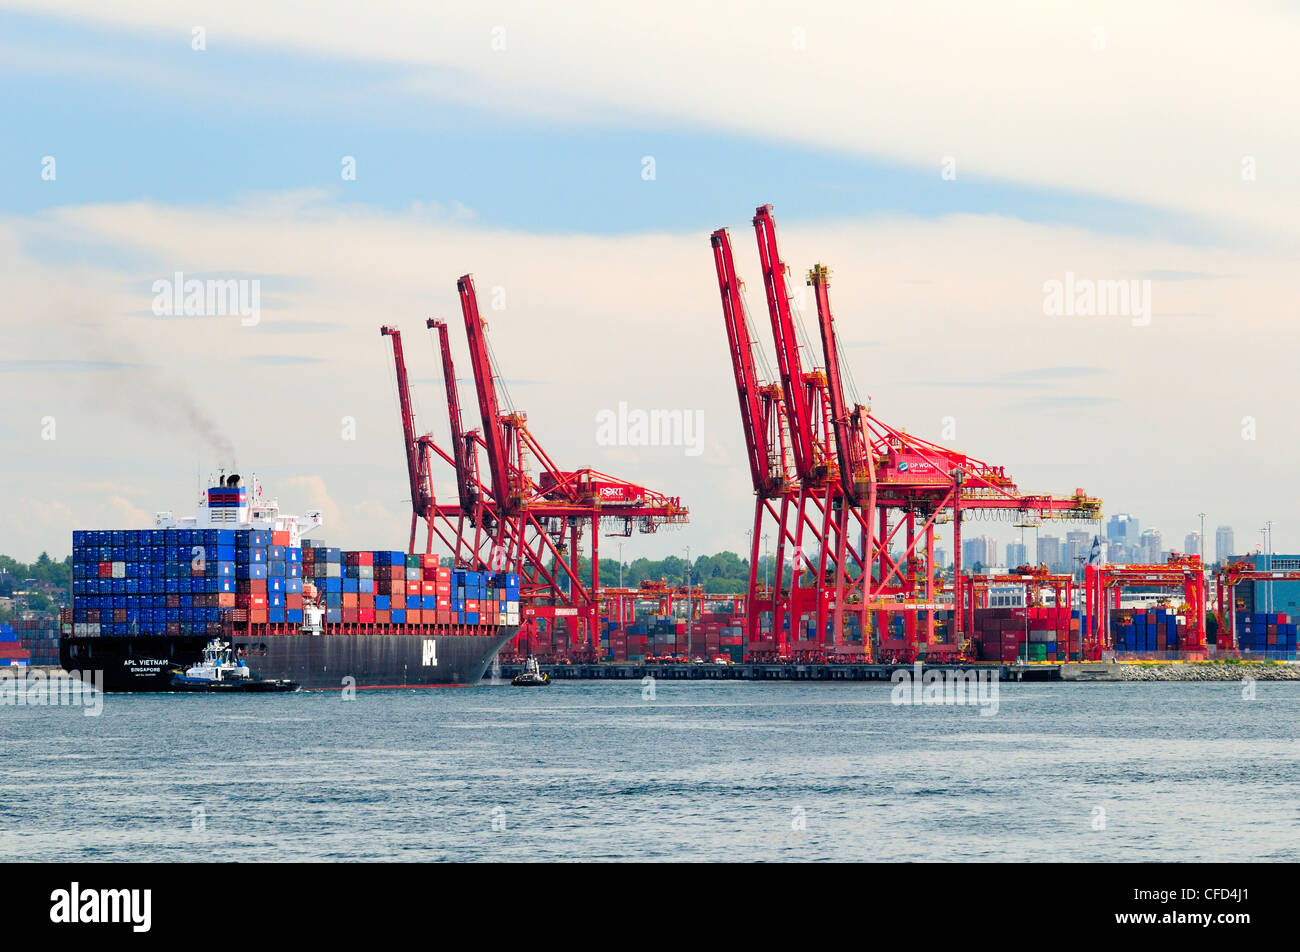 APL container ship Vietnam approaches docks Stock Photo